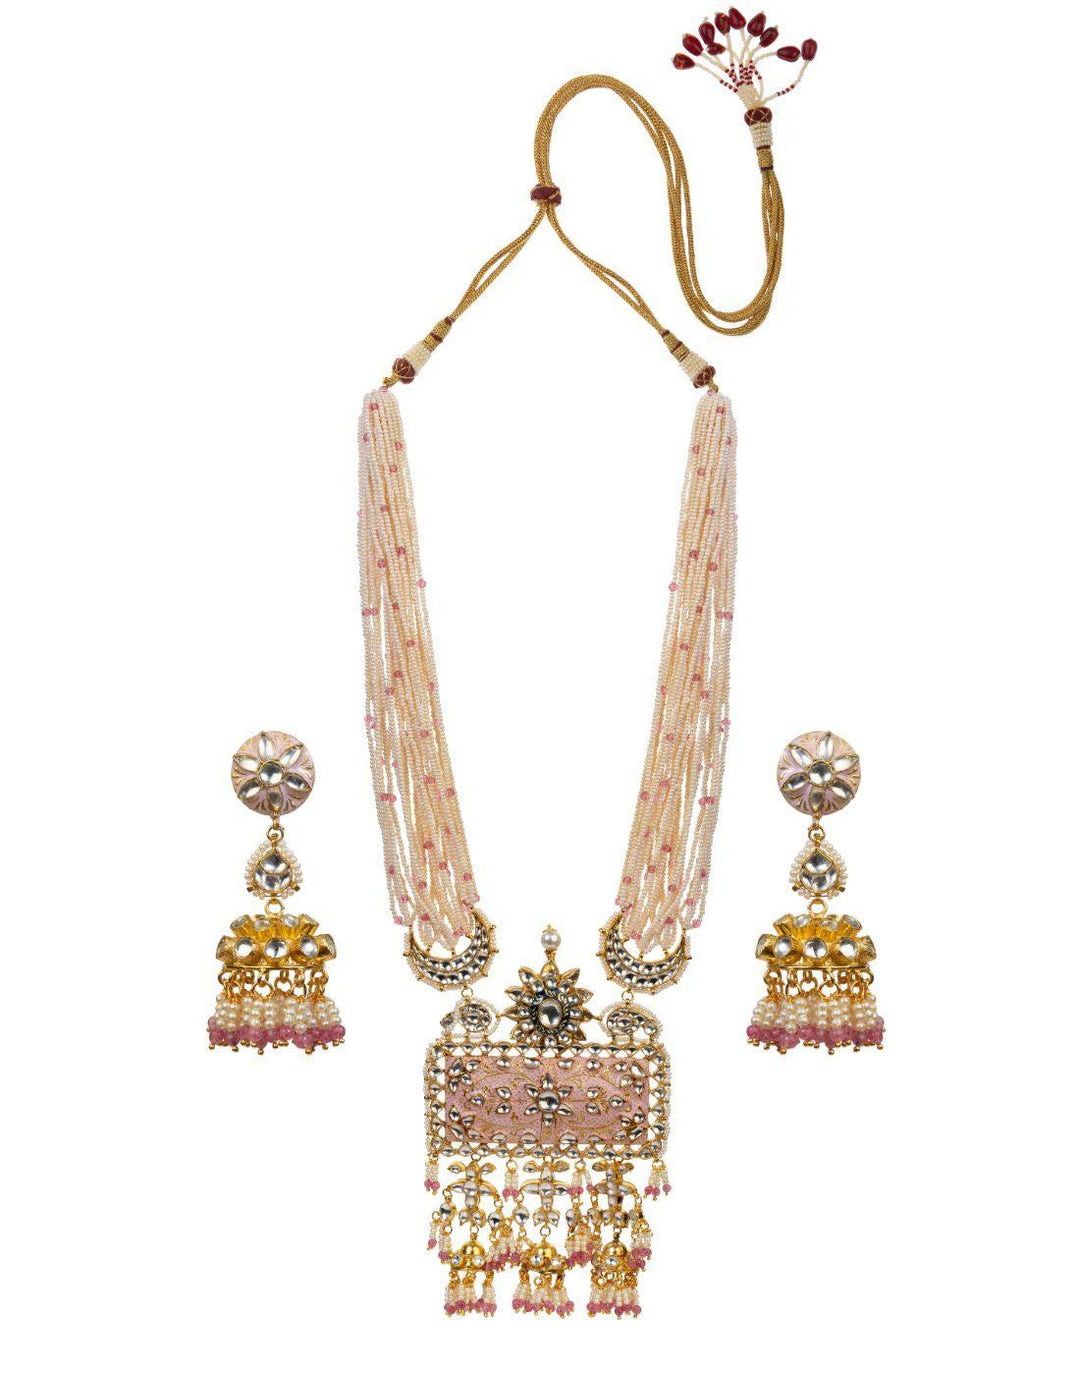 Peach Lehenga Choli for Wedding + Antique Gold sequins Hand-embroidered Potli + Pink and White Pearl Meenakari Heavy Pendant Necklace Set - Rent